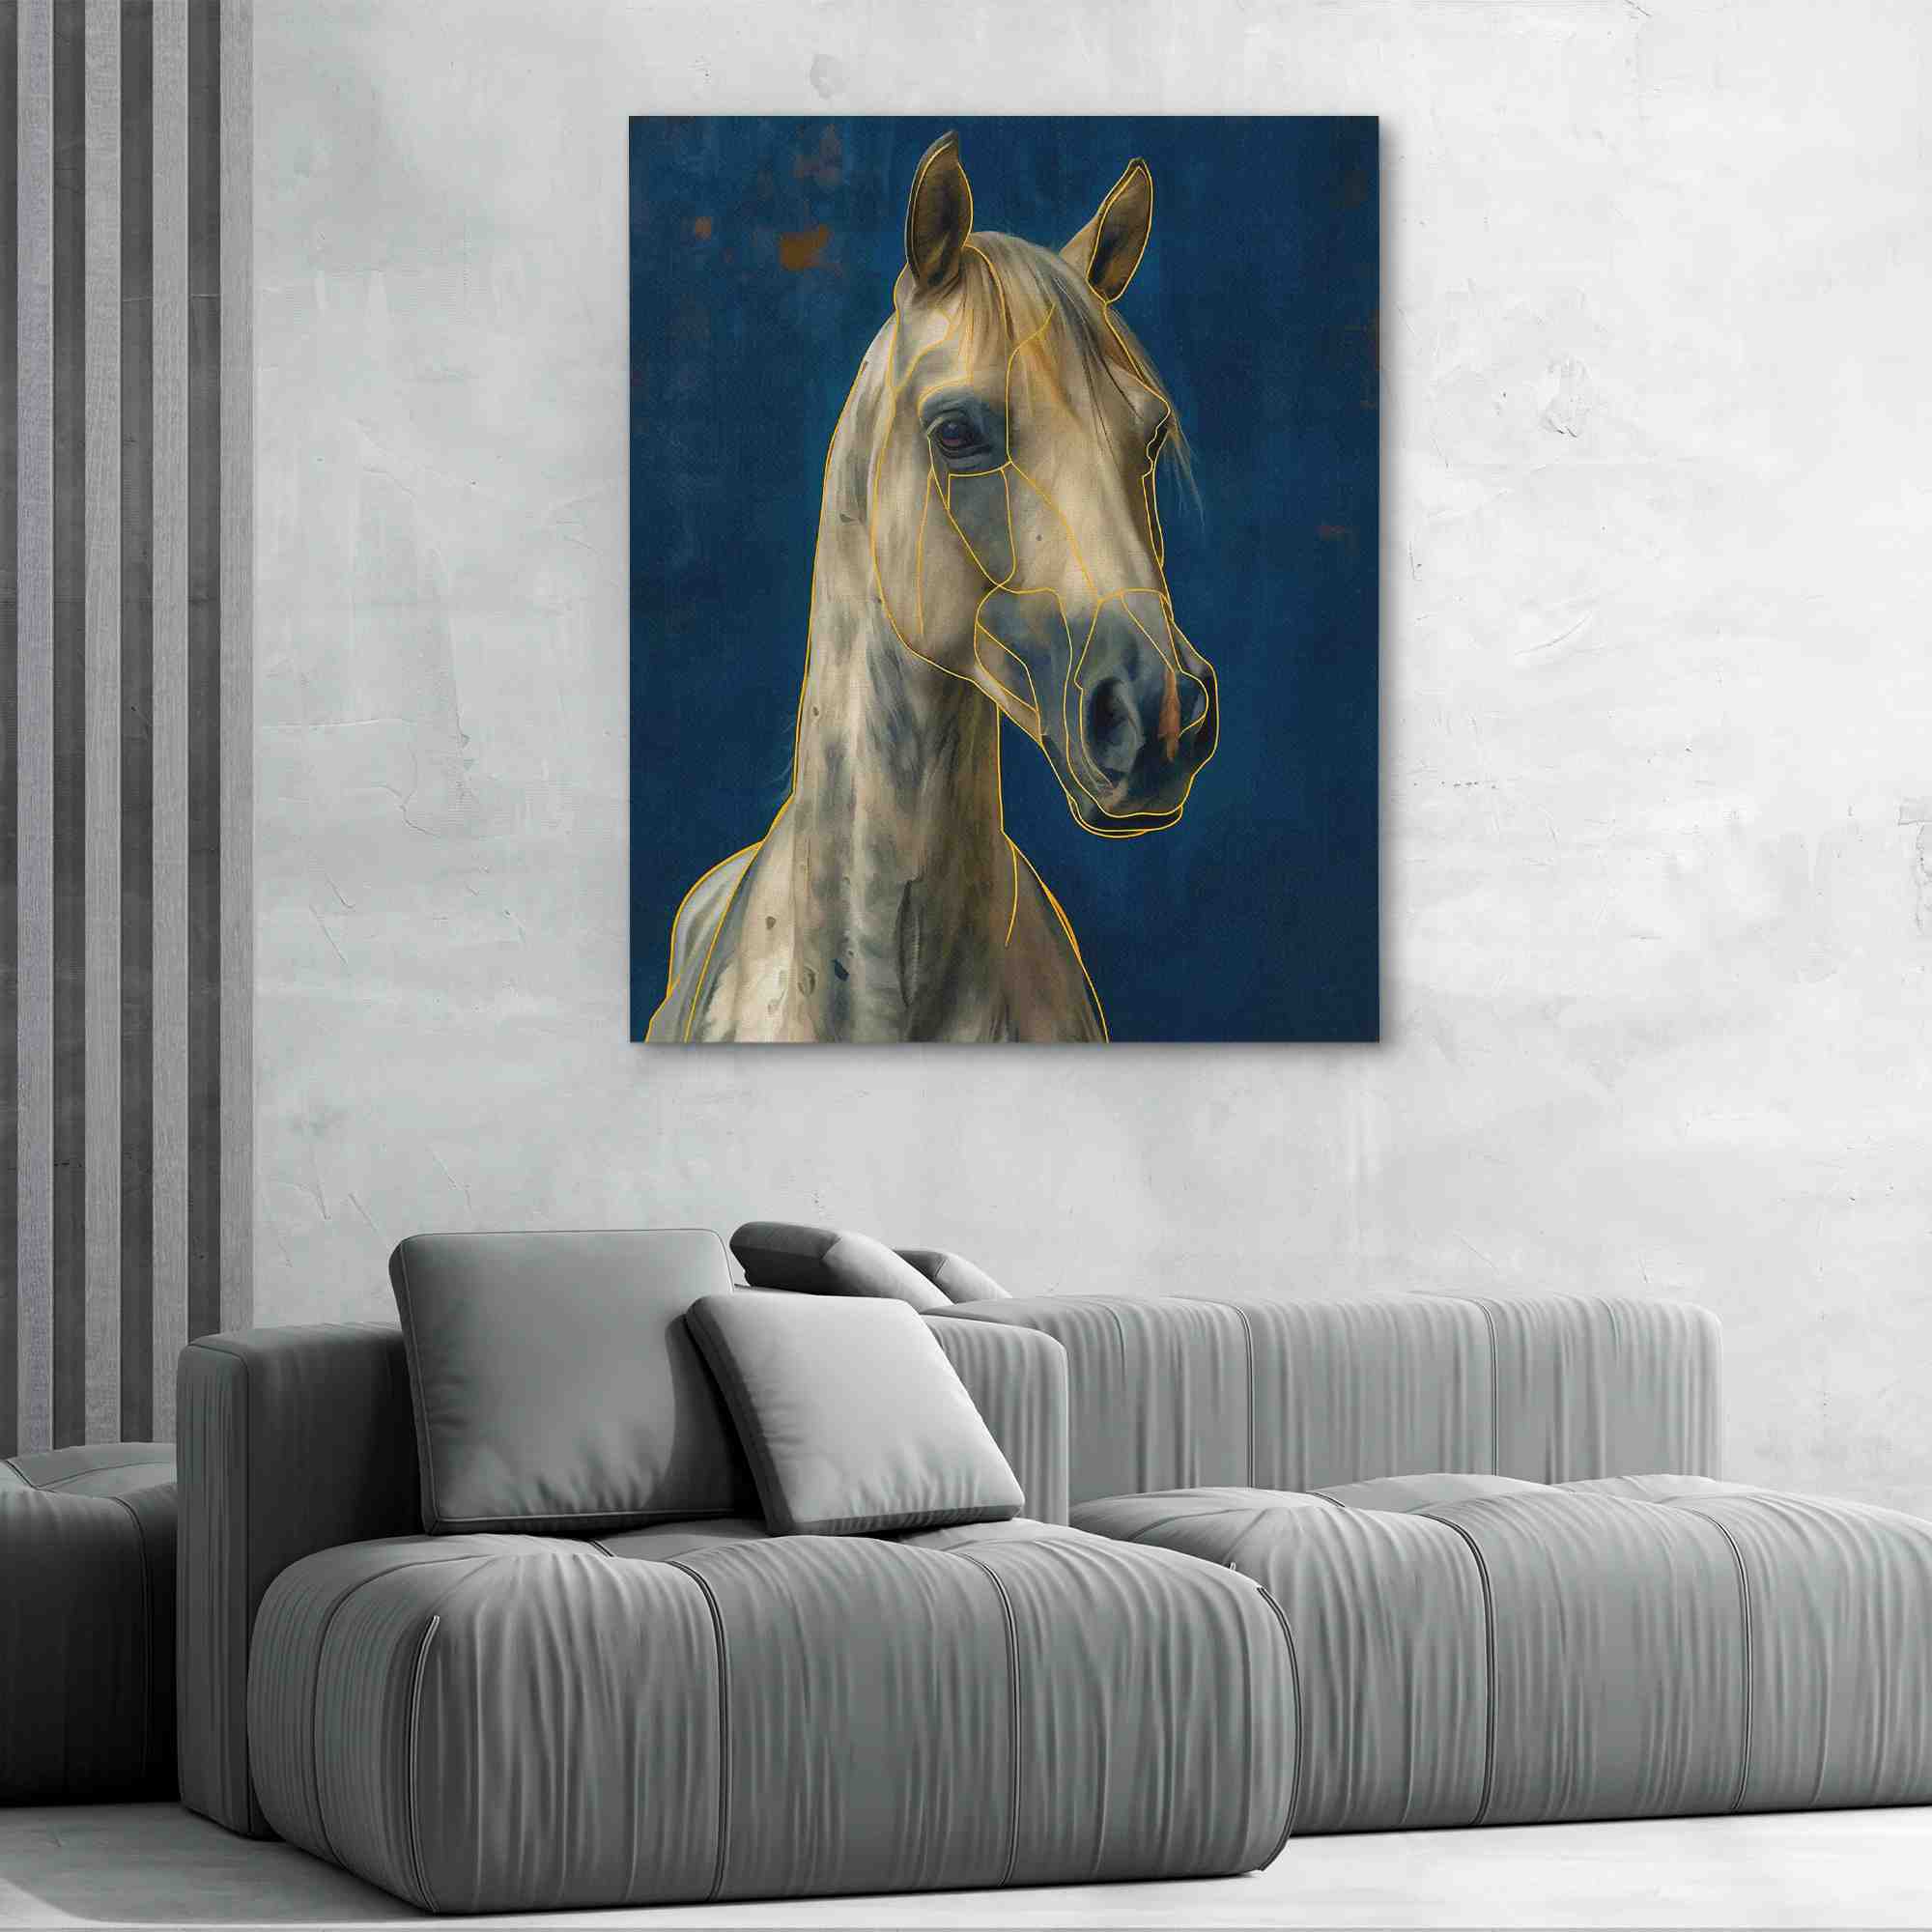 a painting of a white horse on a blue background